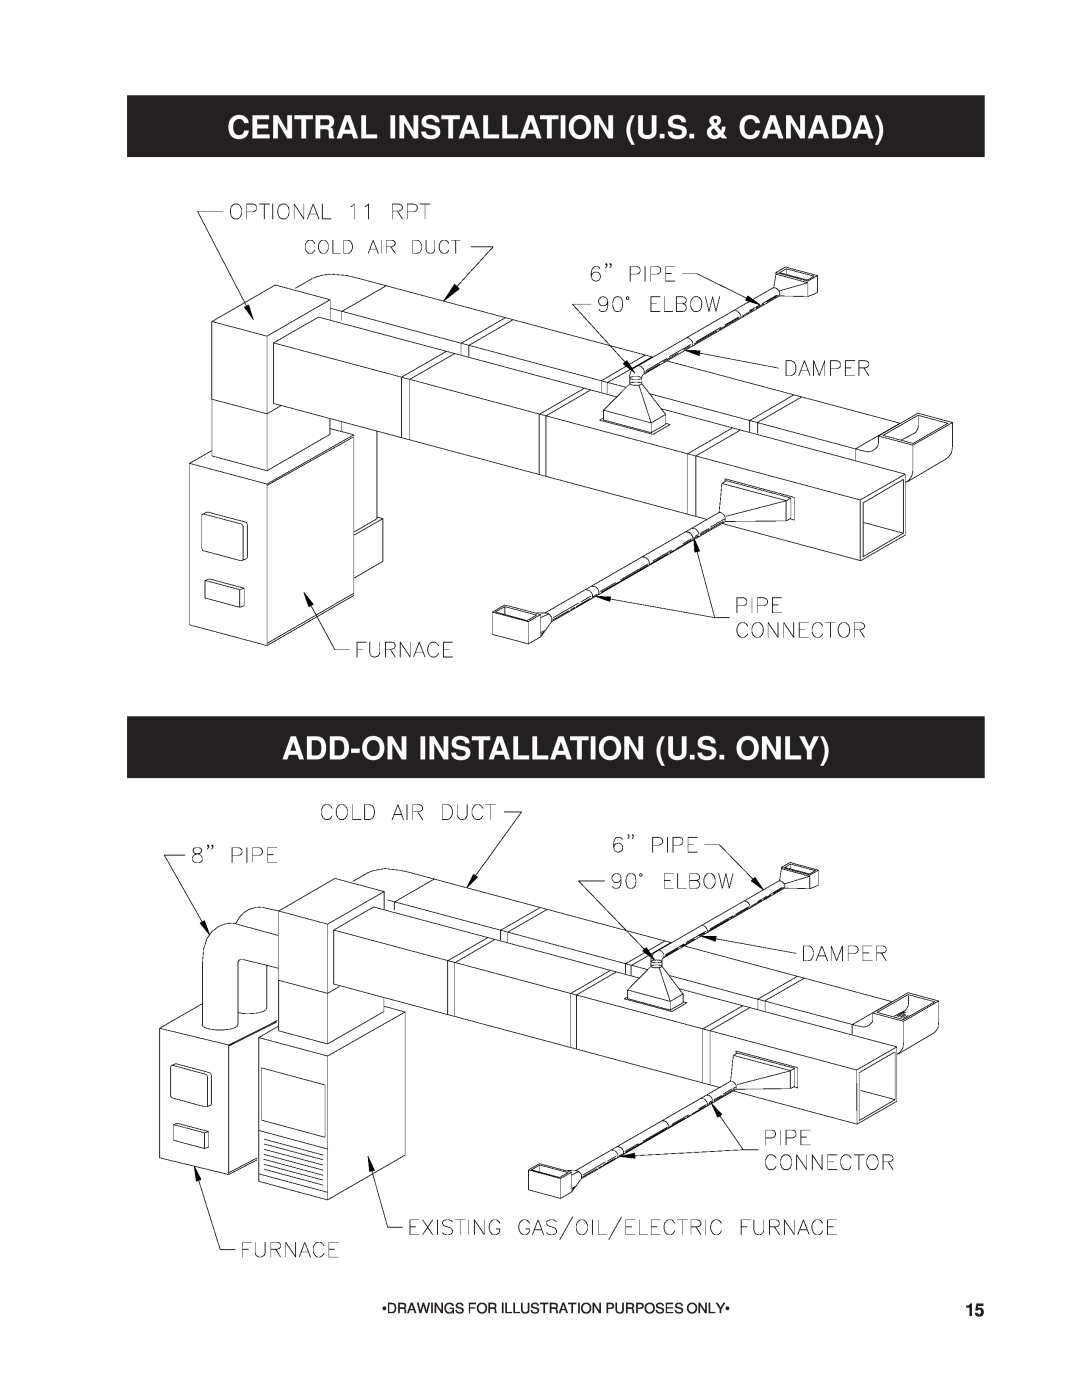 United States Stove 1200Q owner manual Central Installation U.S. & Canada, Add-Oninstallation U.S. Only 